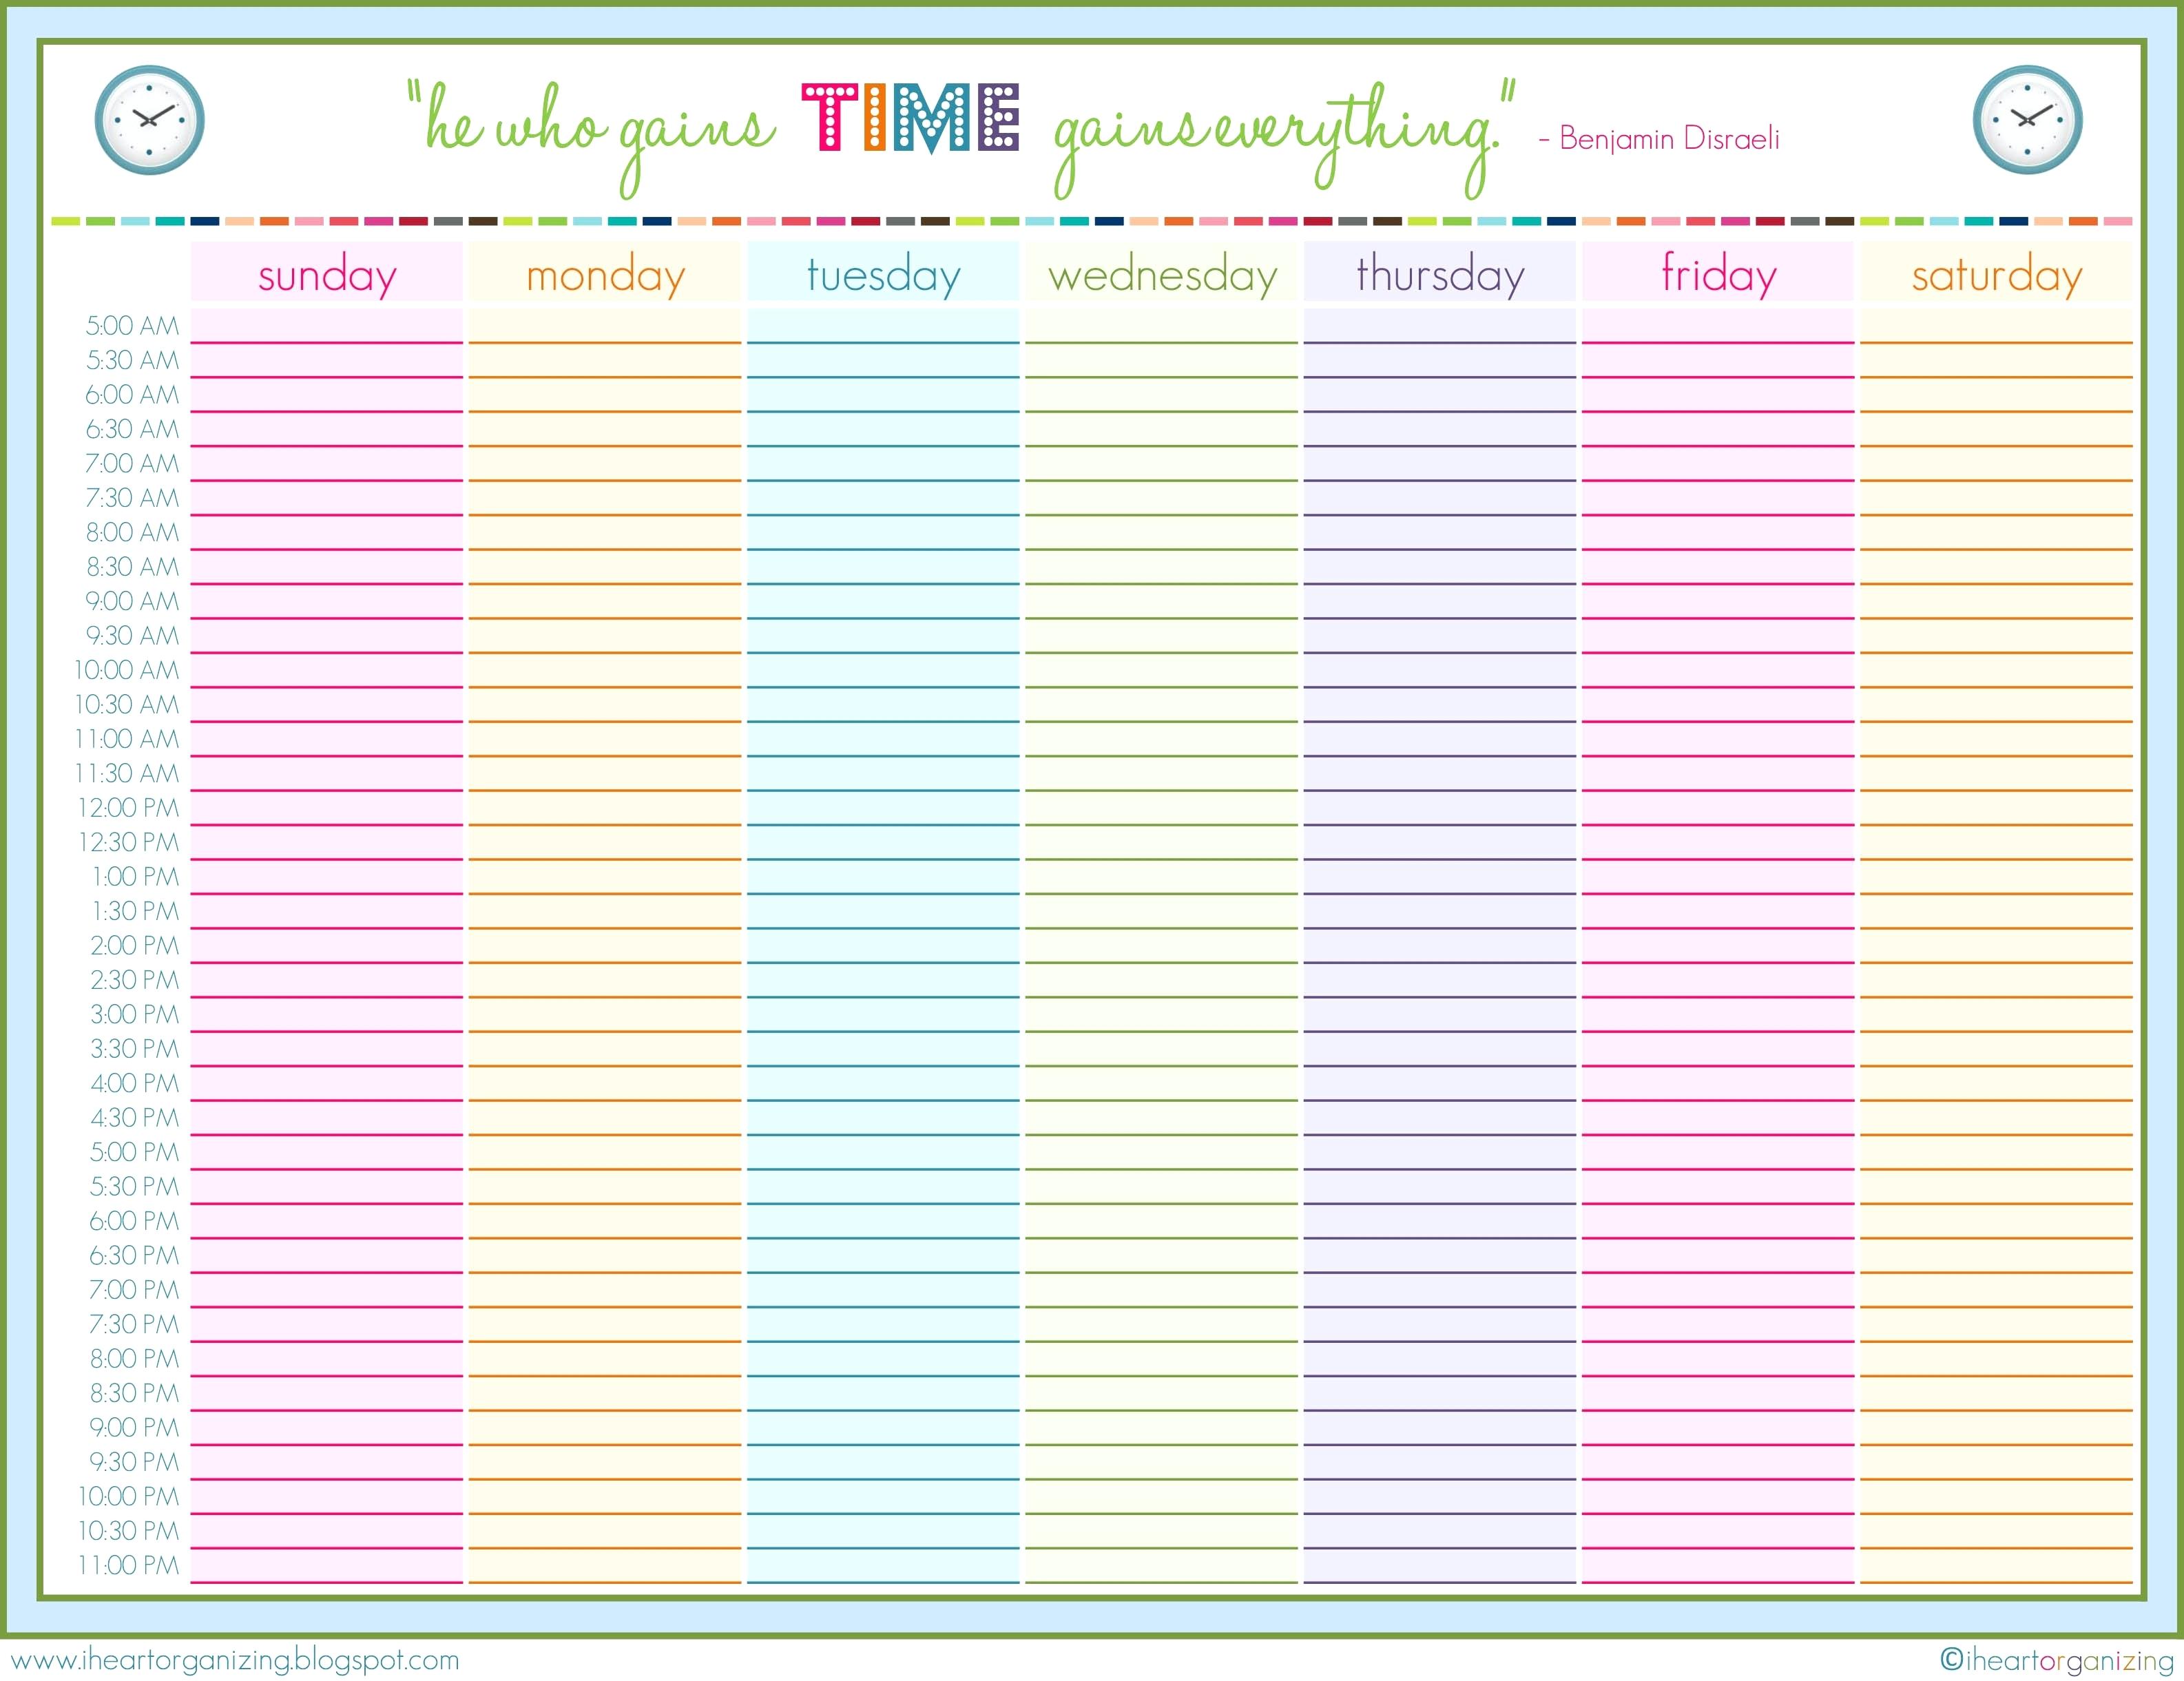 24 Hour Time Schedule Template from shopfreshboutique.com